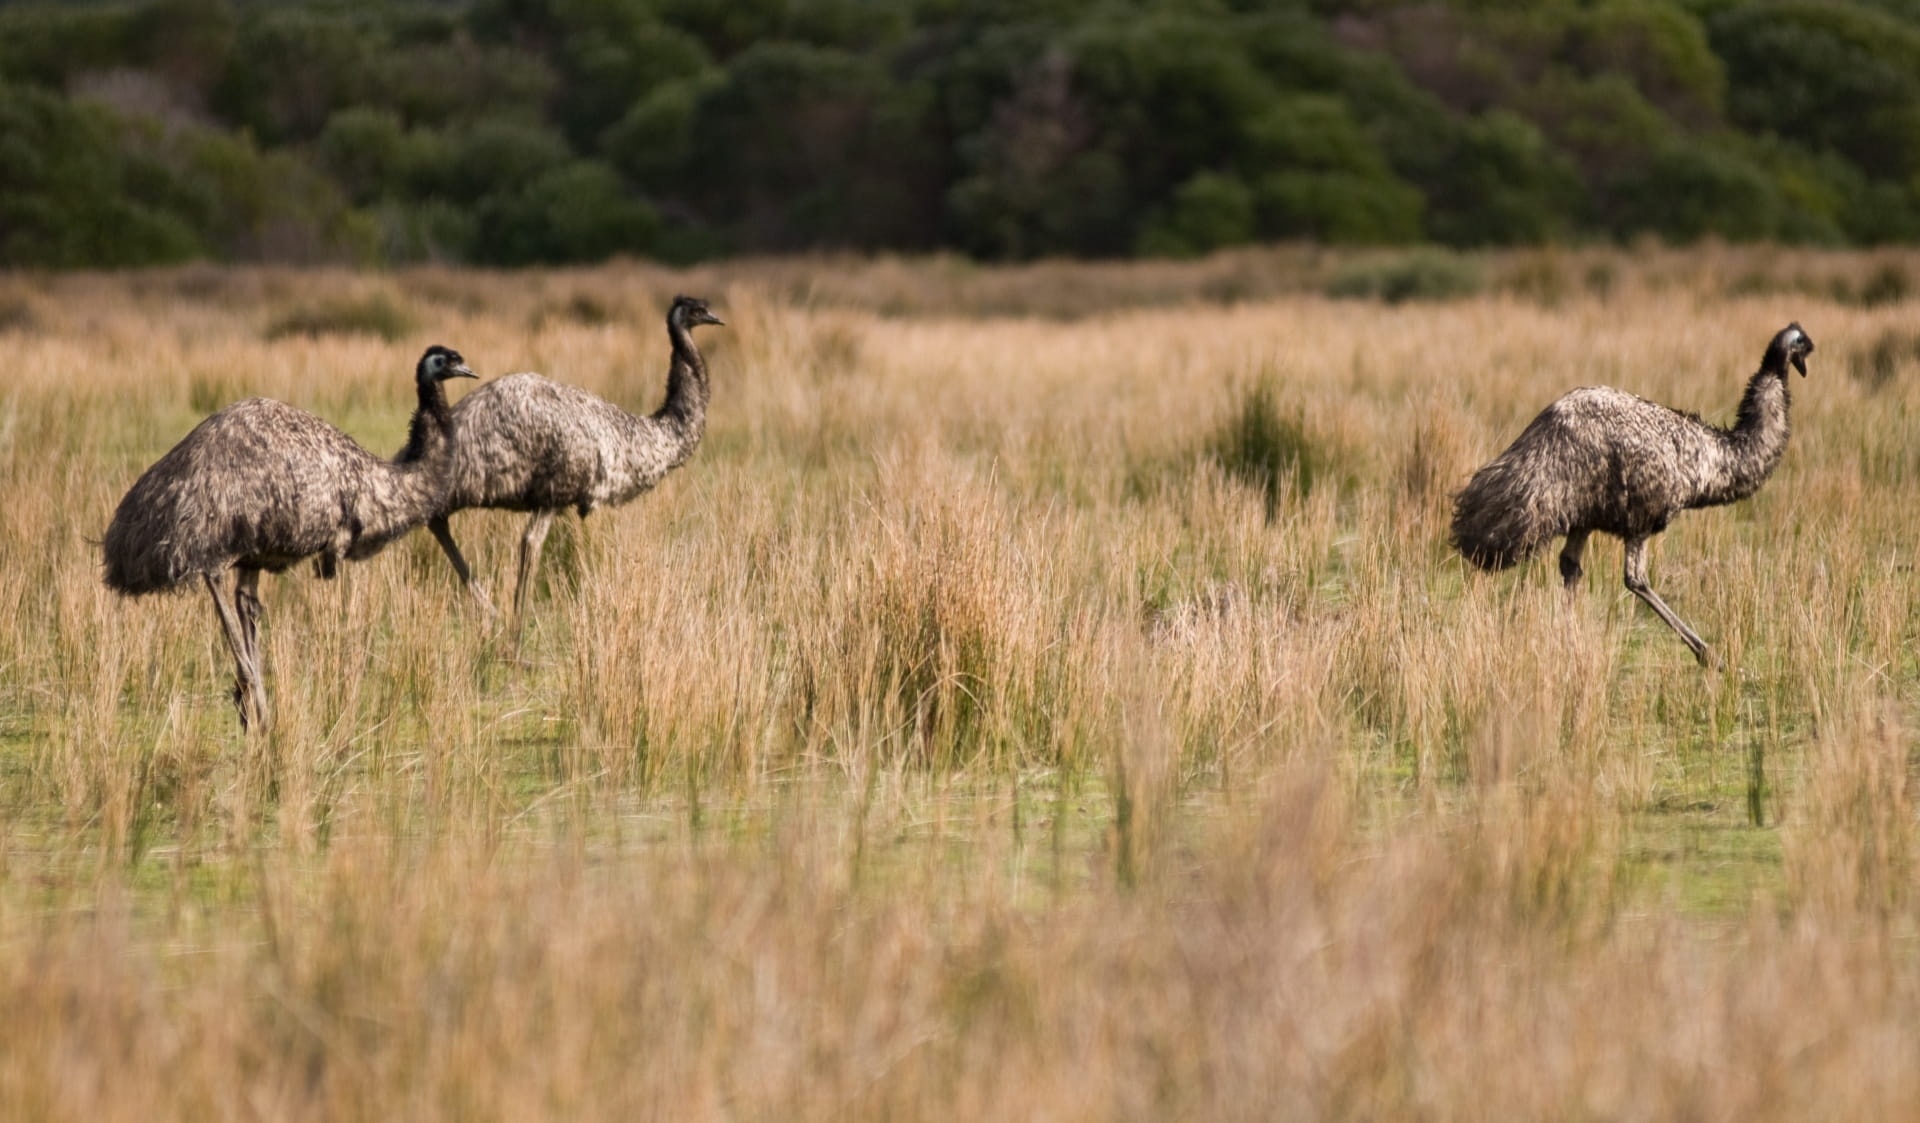 Three emus walk together in the grasslands at Wilsons Promontory National Park.